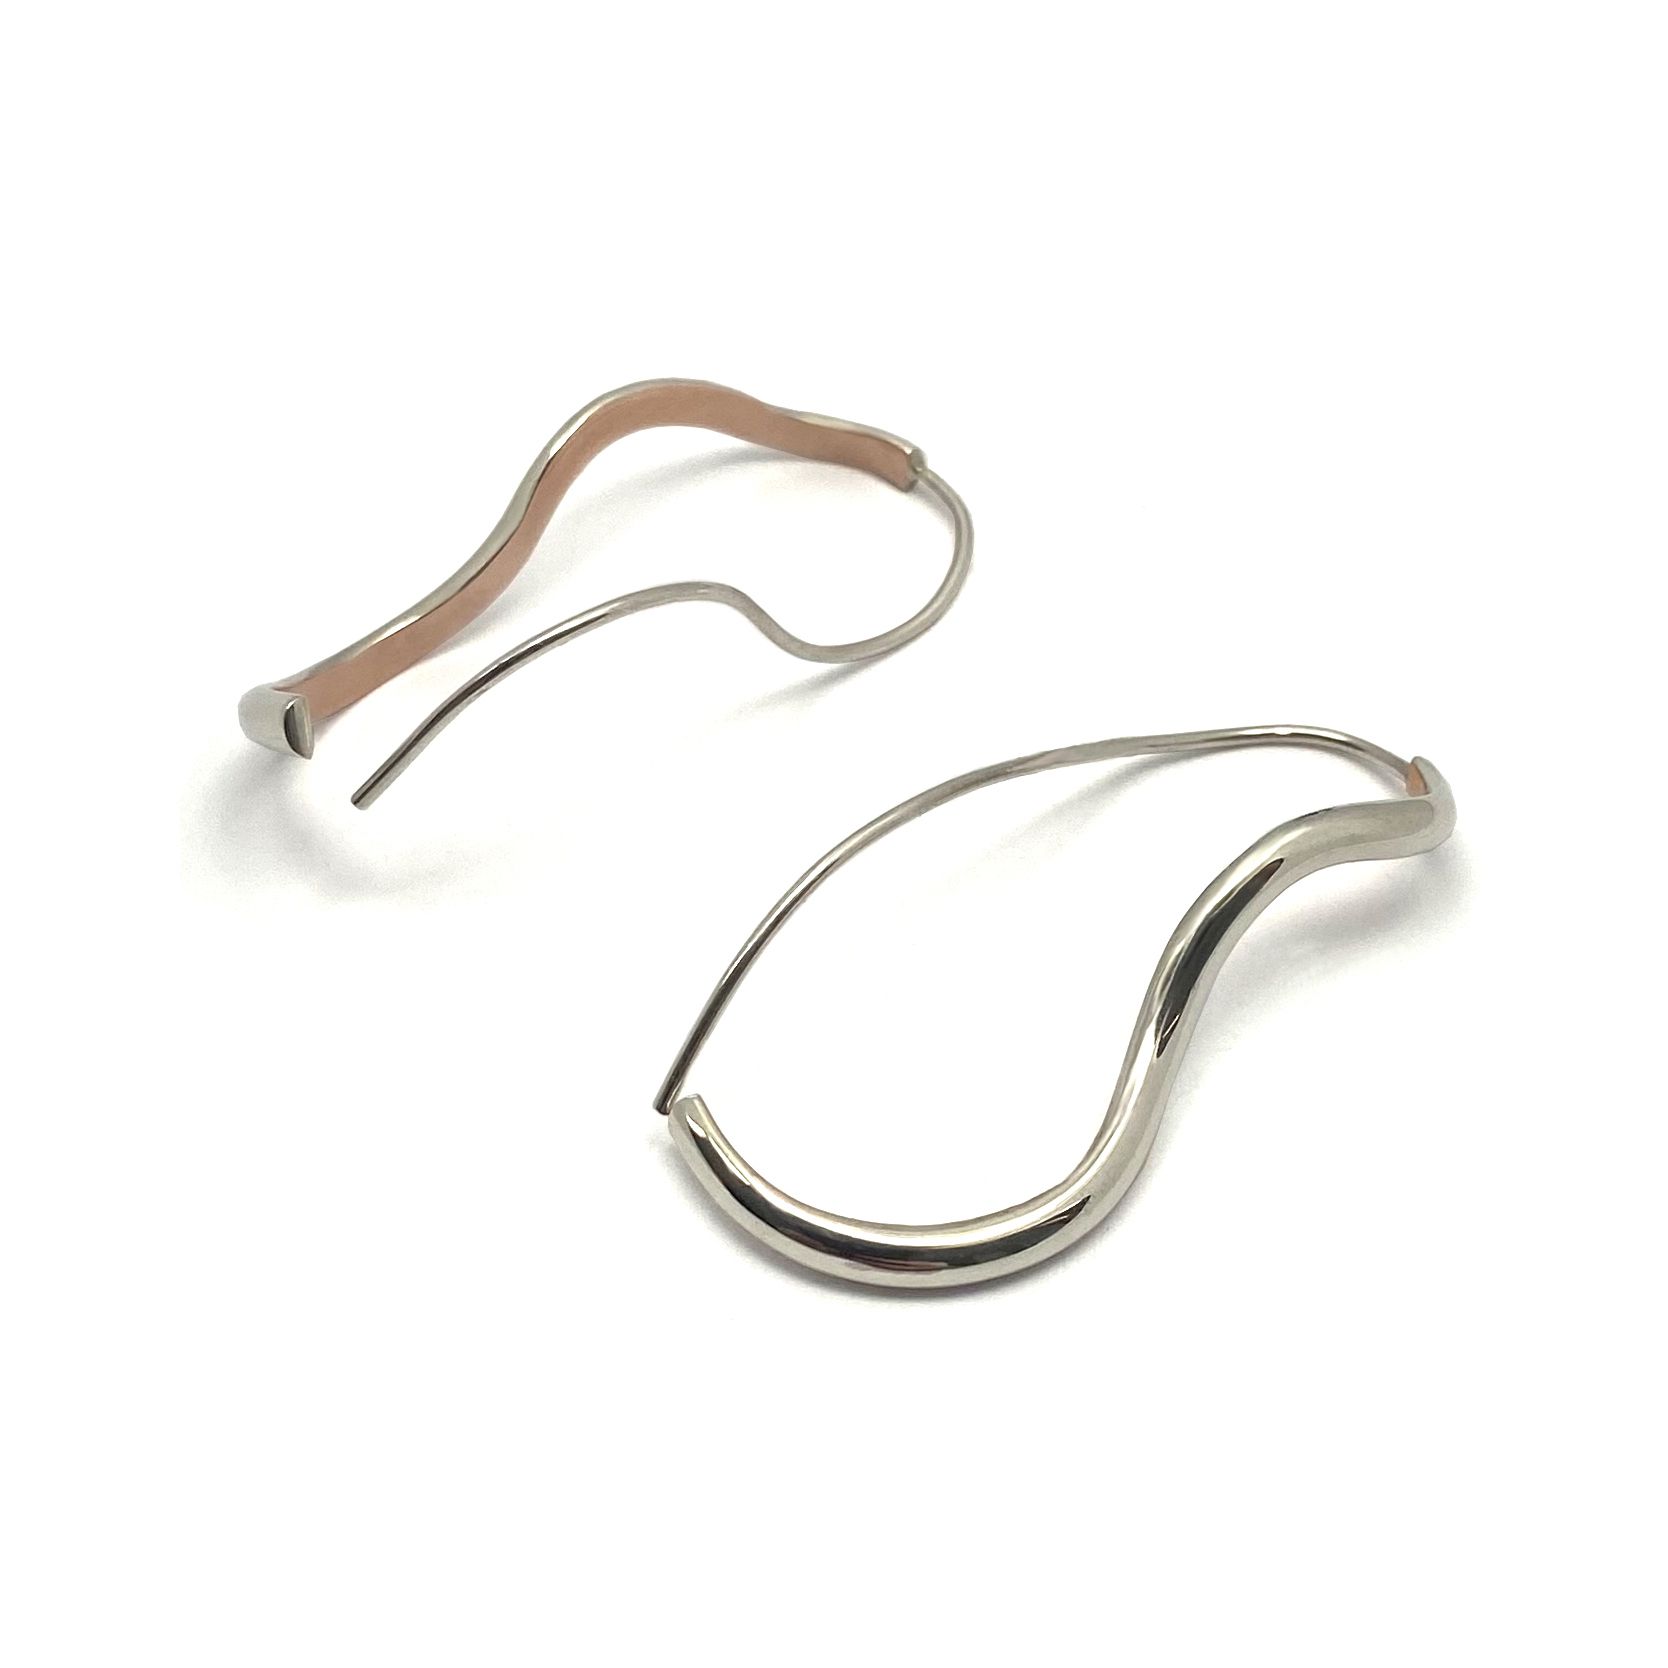 Claudine Moncion: Long Wire Earrings Product Image 1 of 1